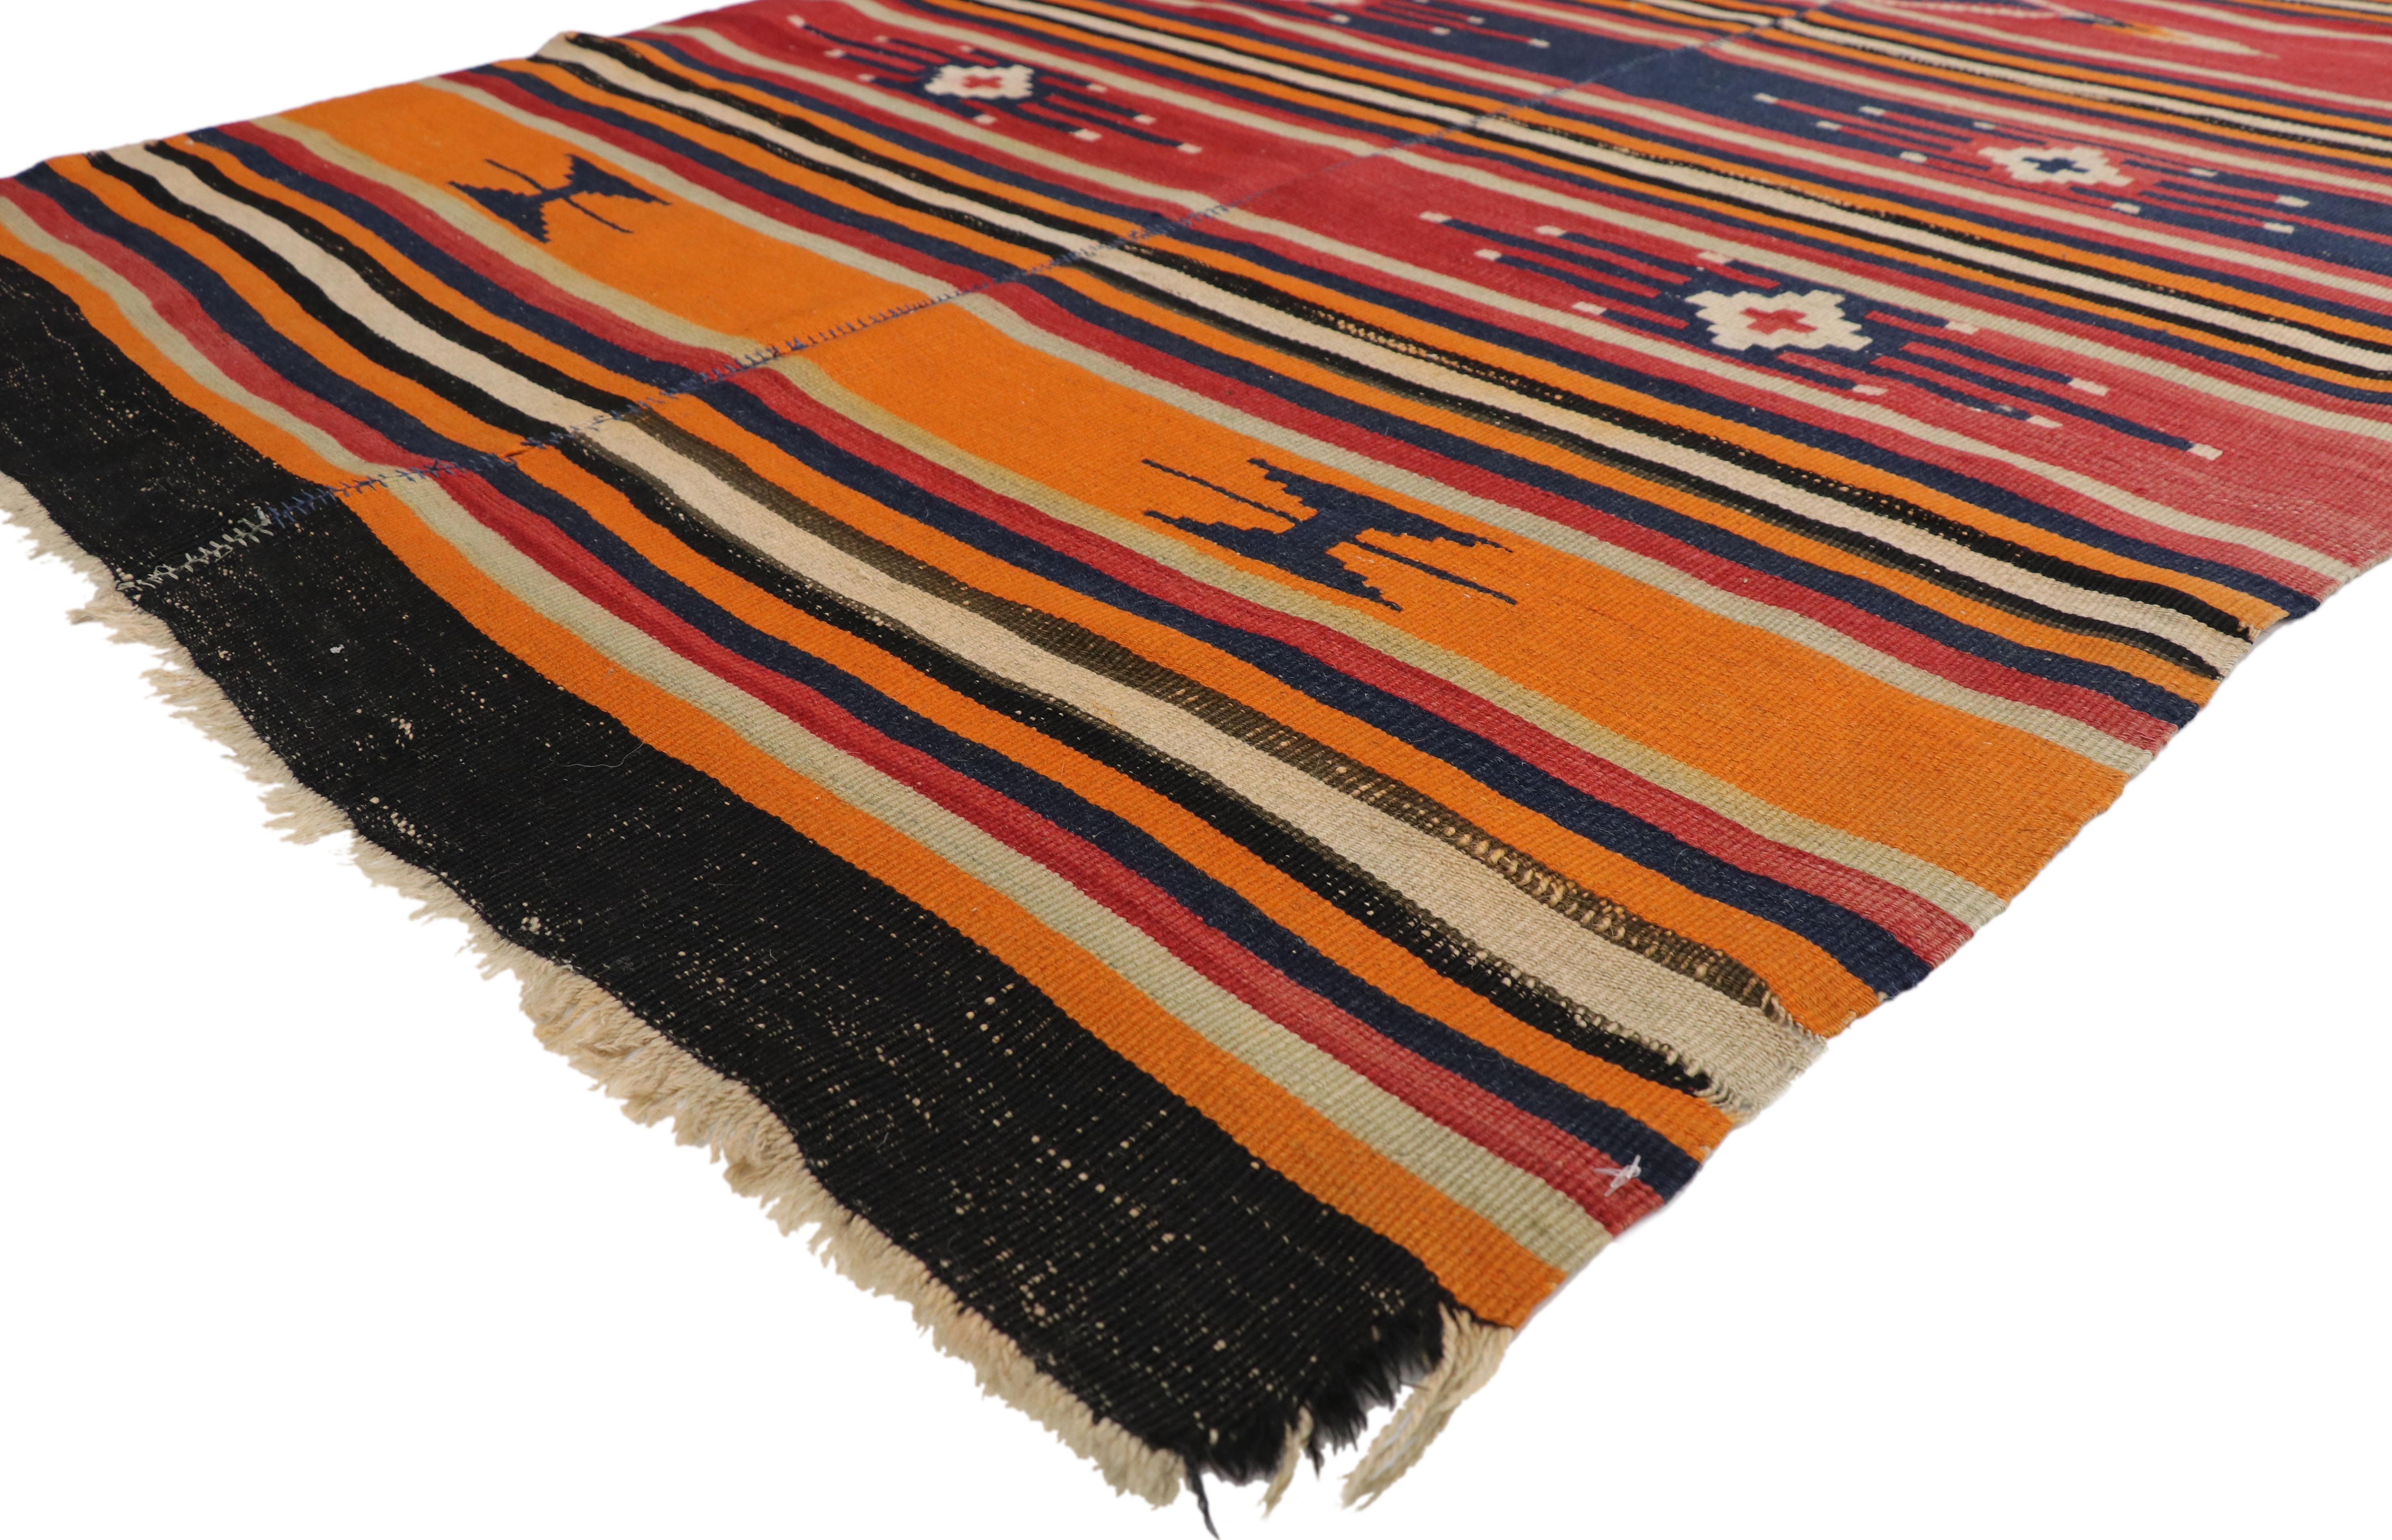 73172, vintage Turkish Kilim rug with Tribal style. Made by Turkish artisans in the 1940s and features wide and narrow bands of bold colors with secondary protection symbols. Rendered in orange, red, dark blue, black, brown and creamy beige. The